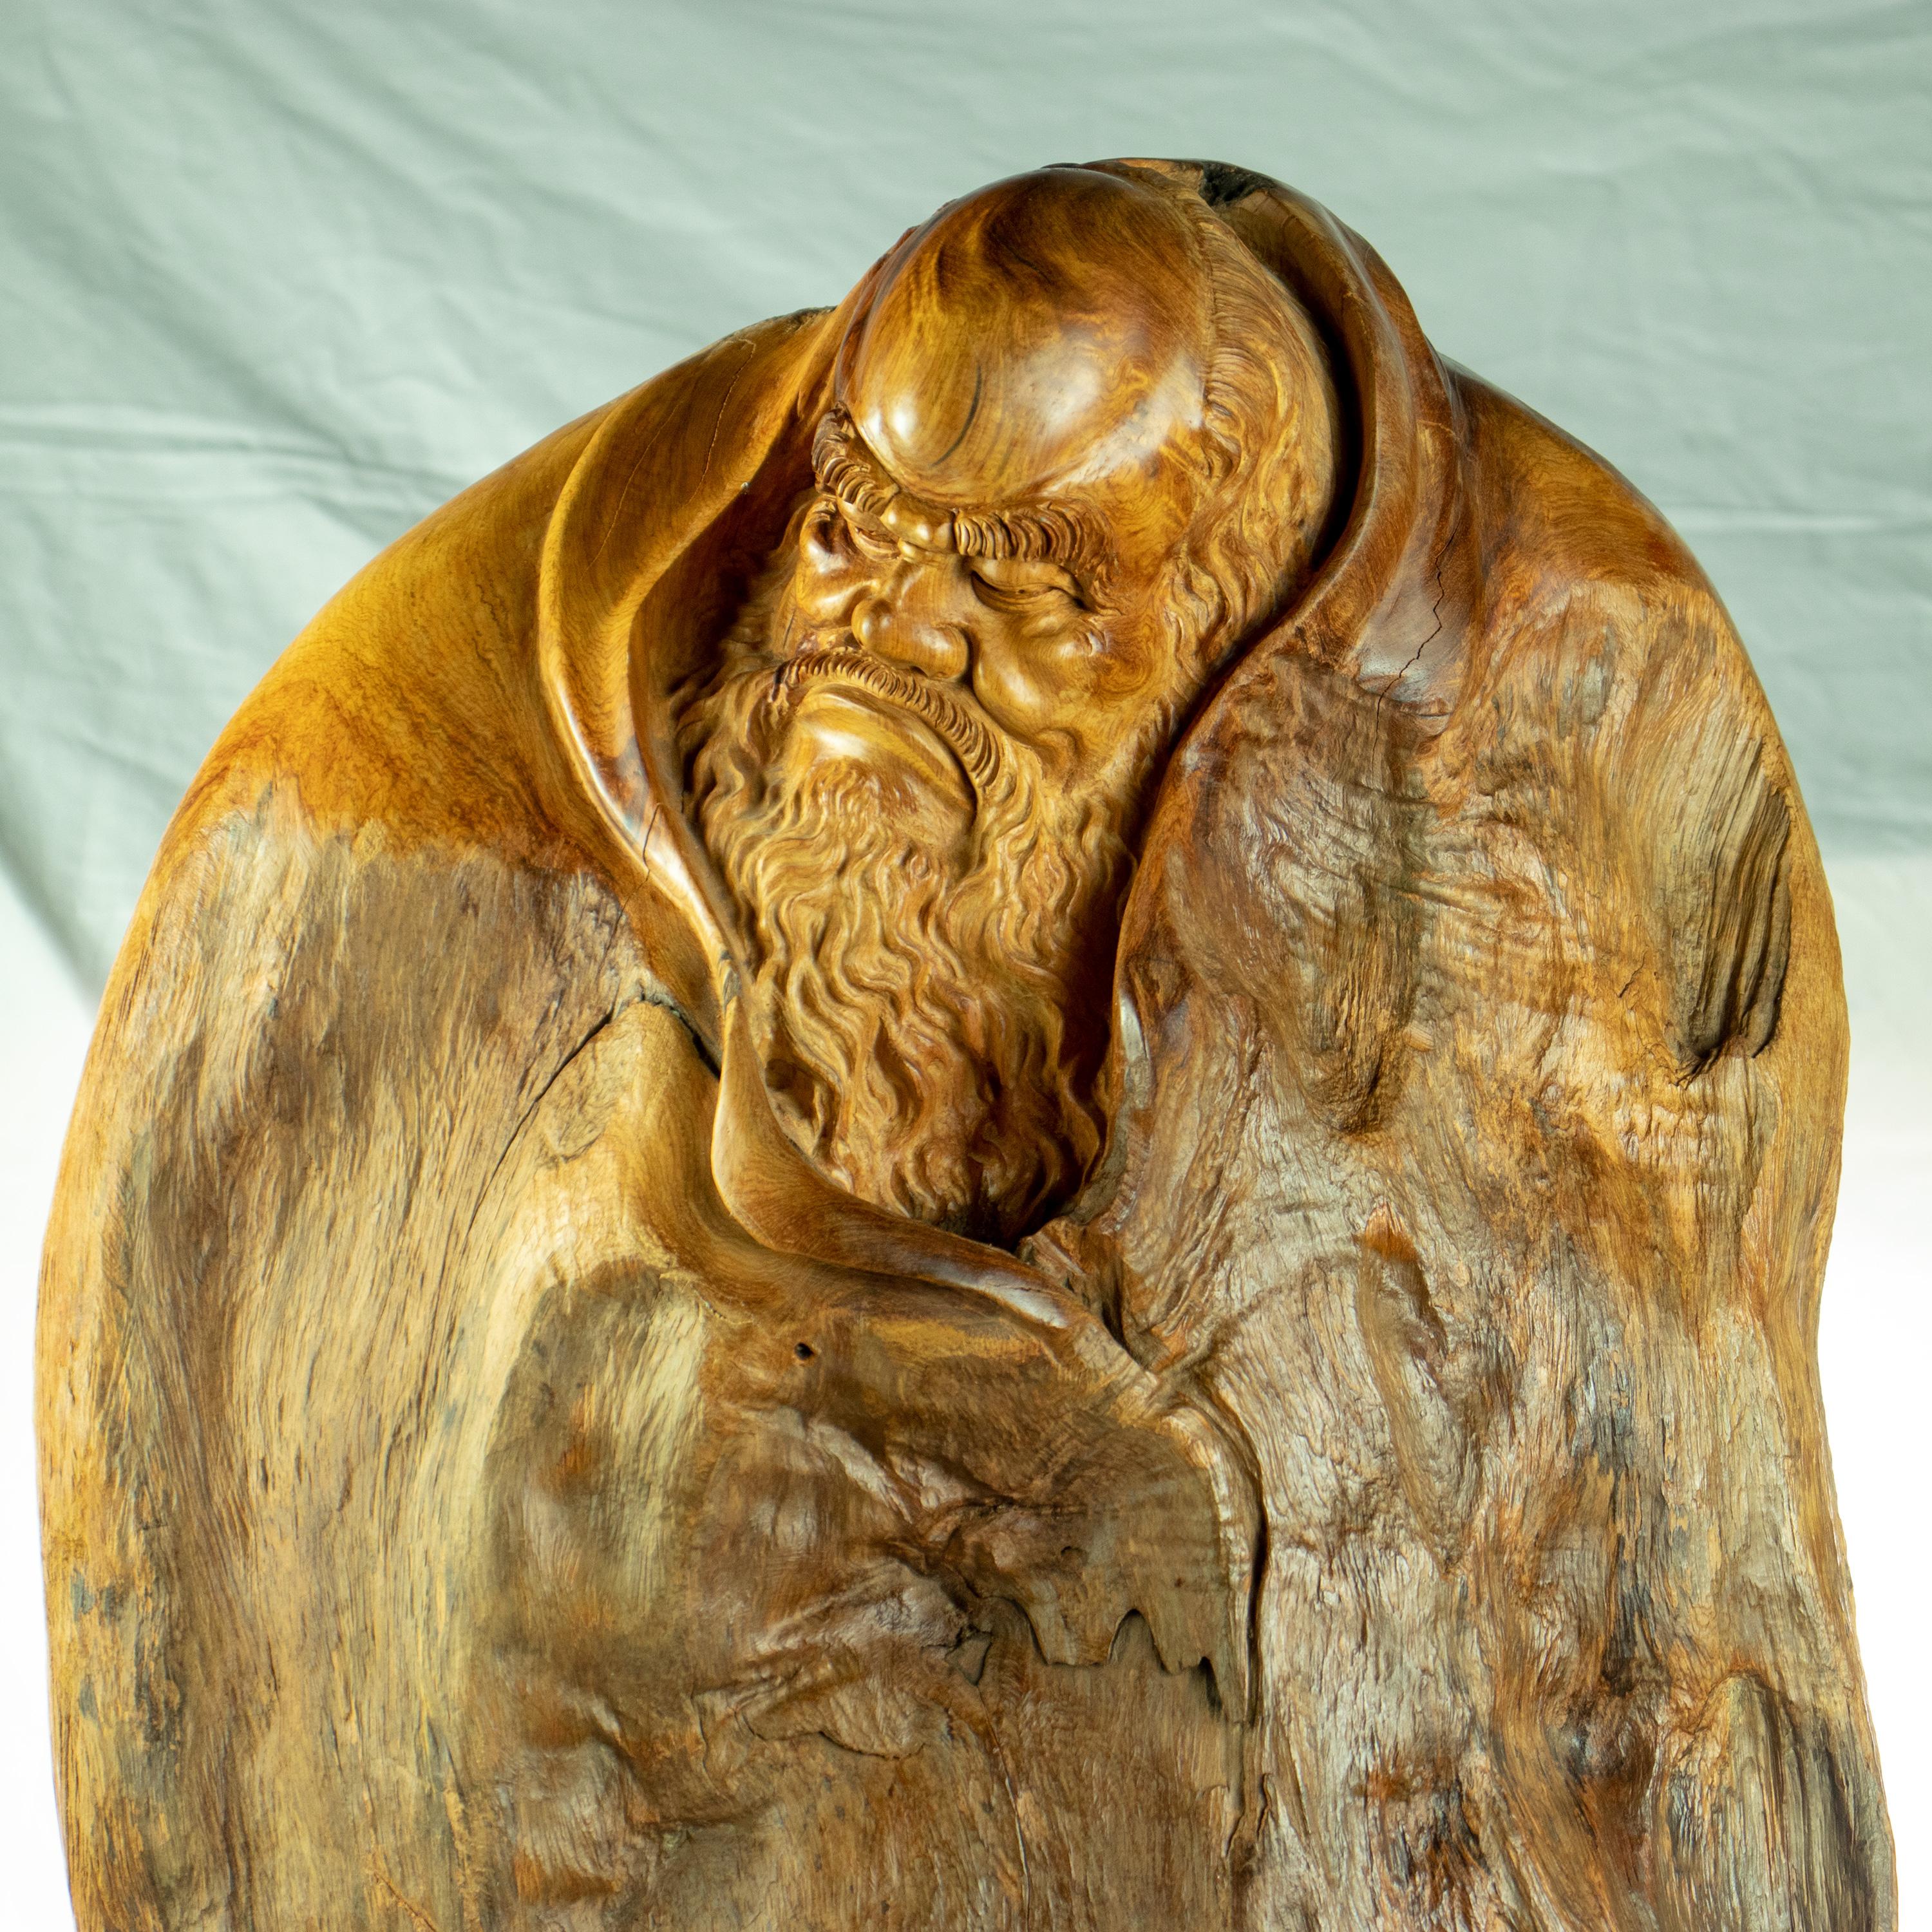 Carved wood Old Wise Man handmade figure. Antique Asian sculpture full of tradition and mysticism created with extreme detail evoking ancient times. Made by fantastic local artists which transform natural materials into unique art works. This